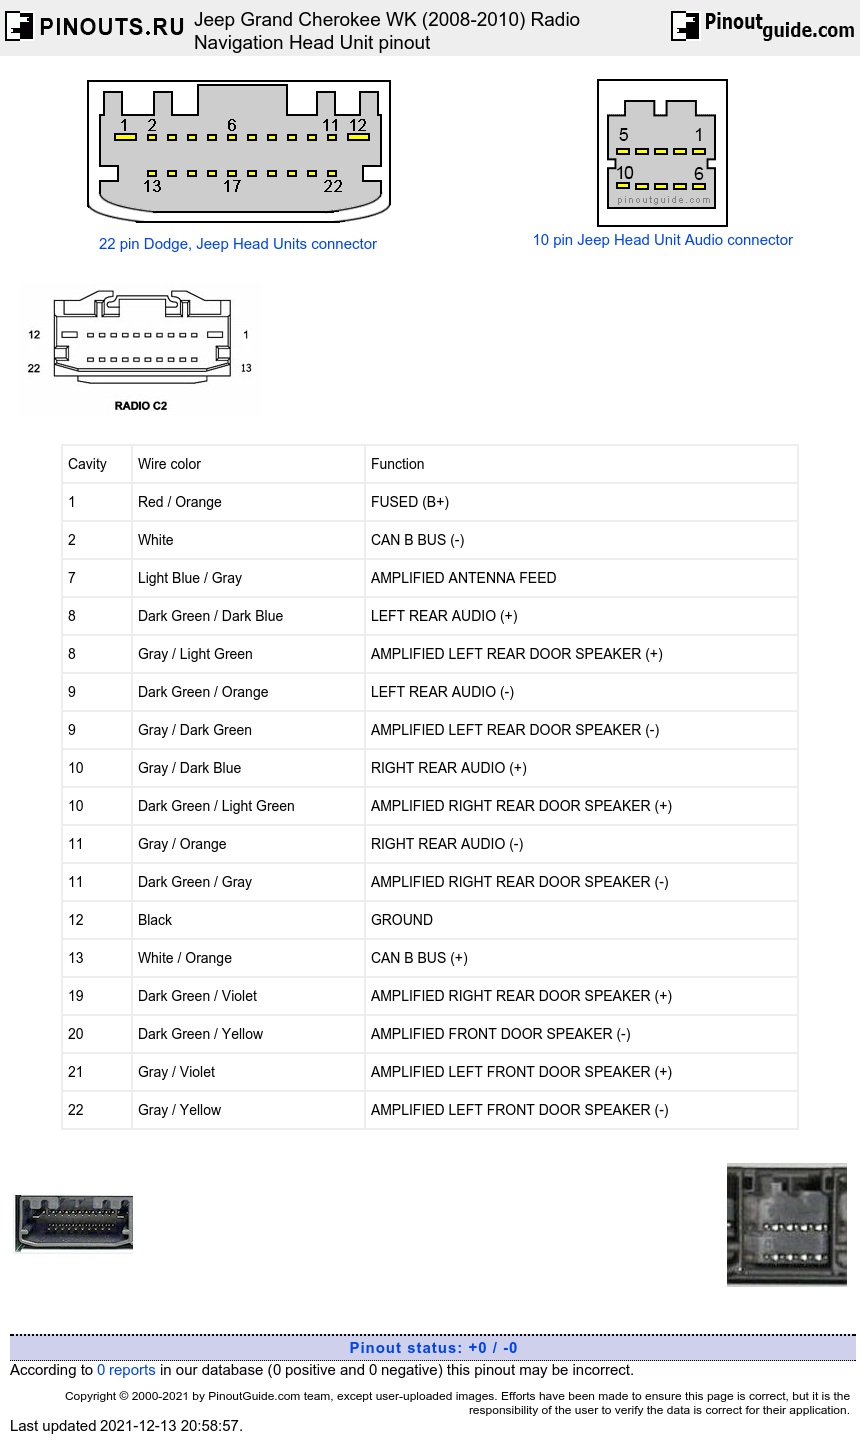 2004 Jeep Liberty Stereo Wiring Diagram from pinoutguide.com